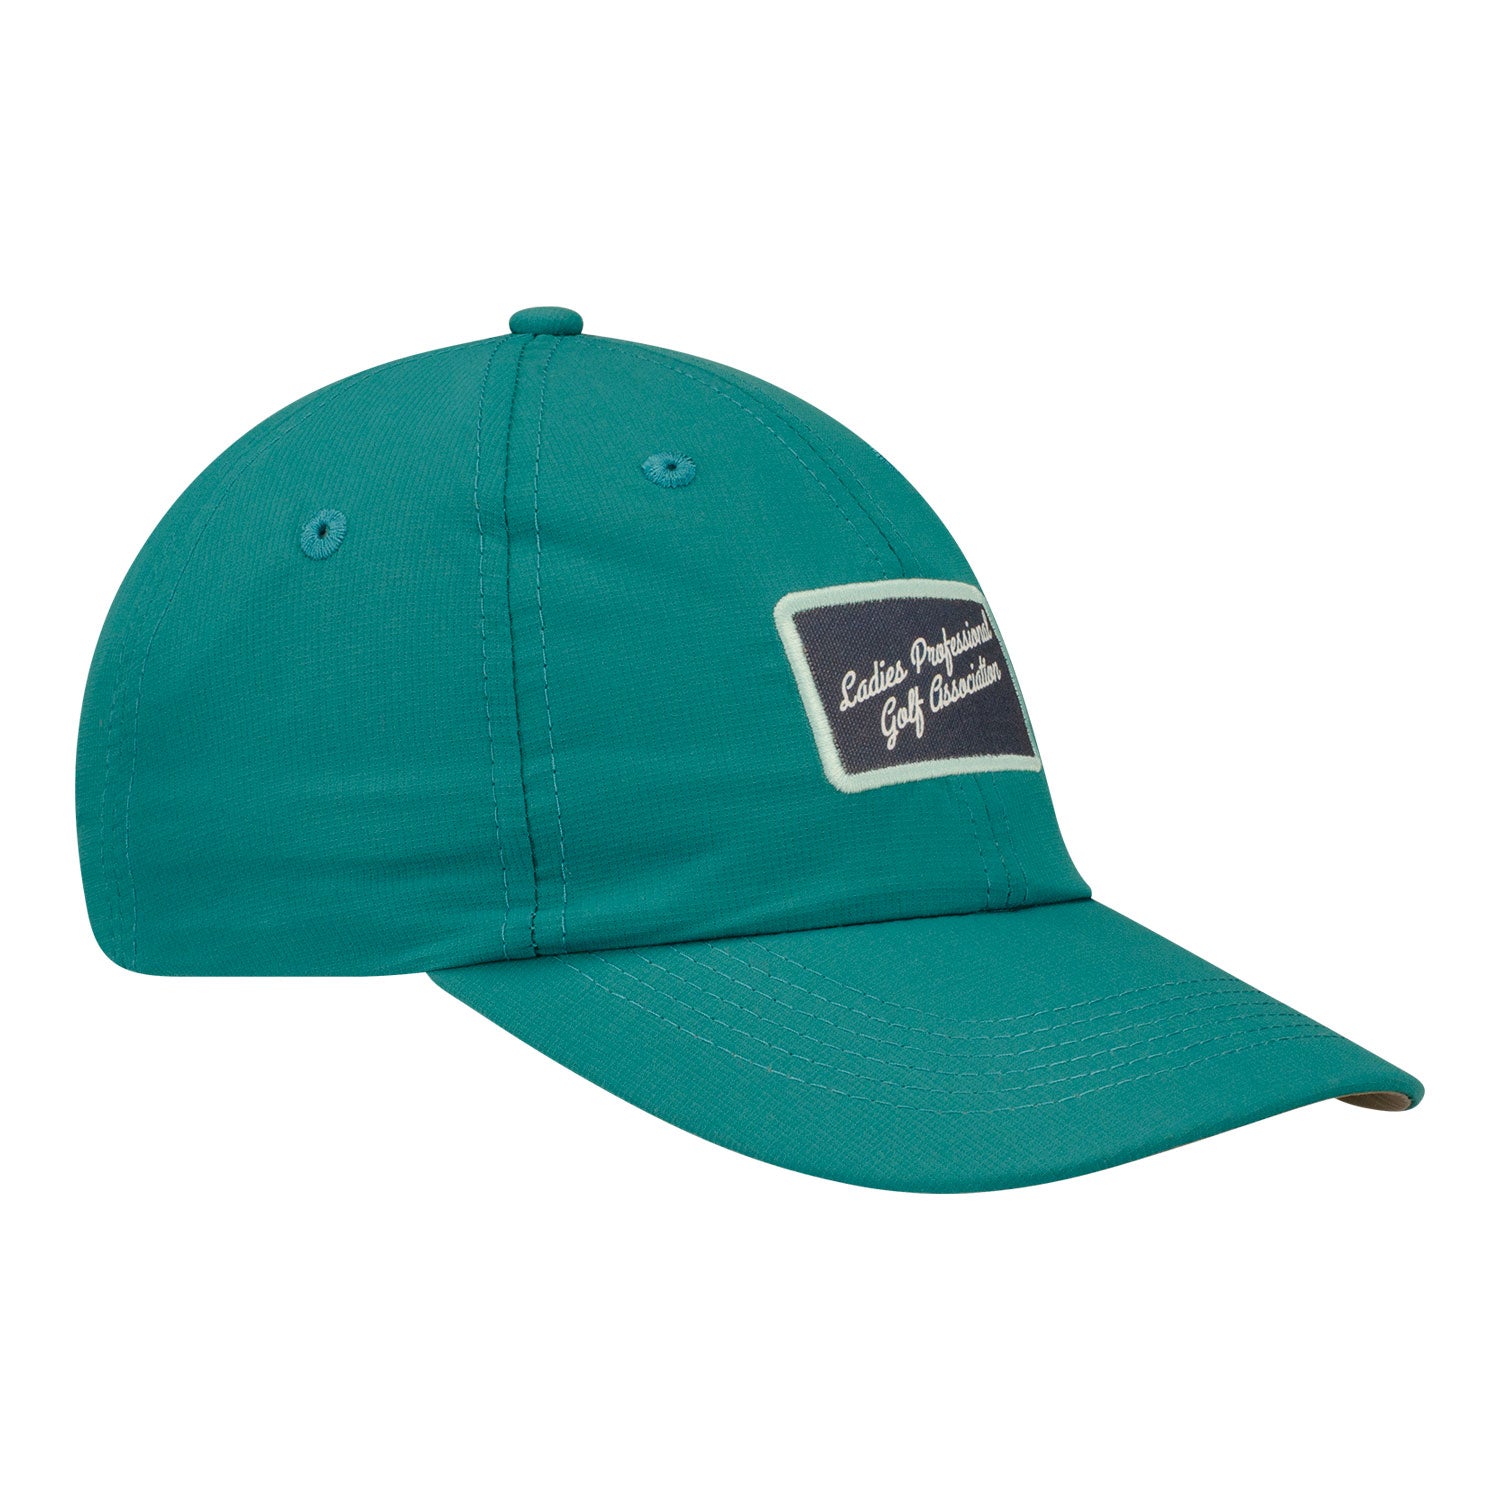 Imperial 2023 LPGA Women's Hat in Teal - Angled Right Side View